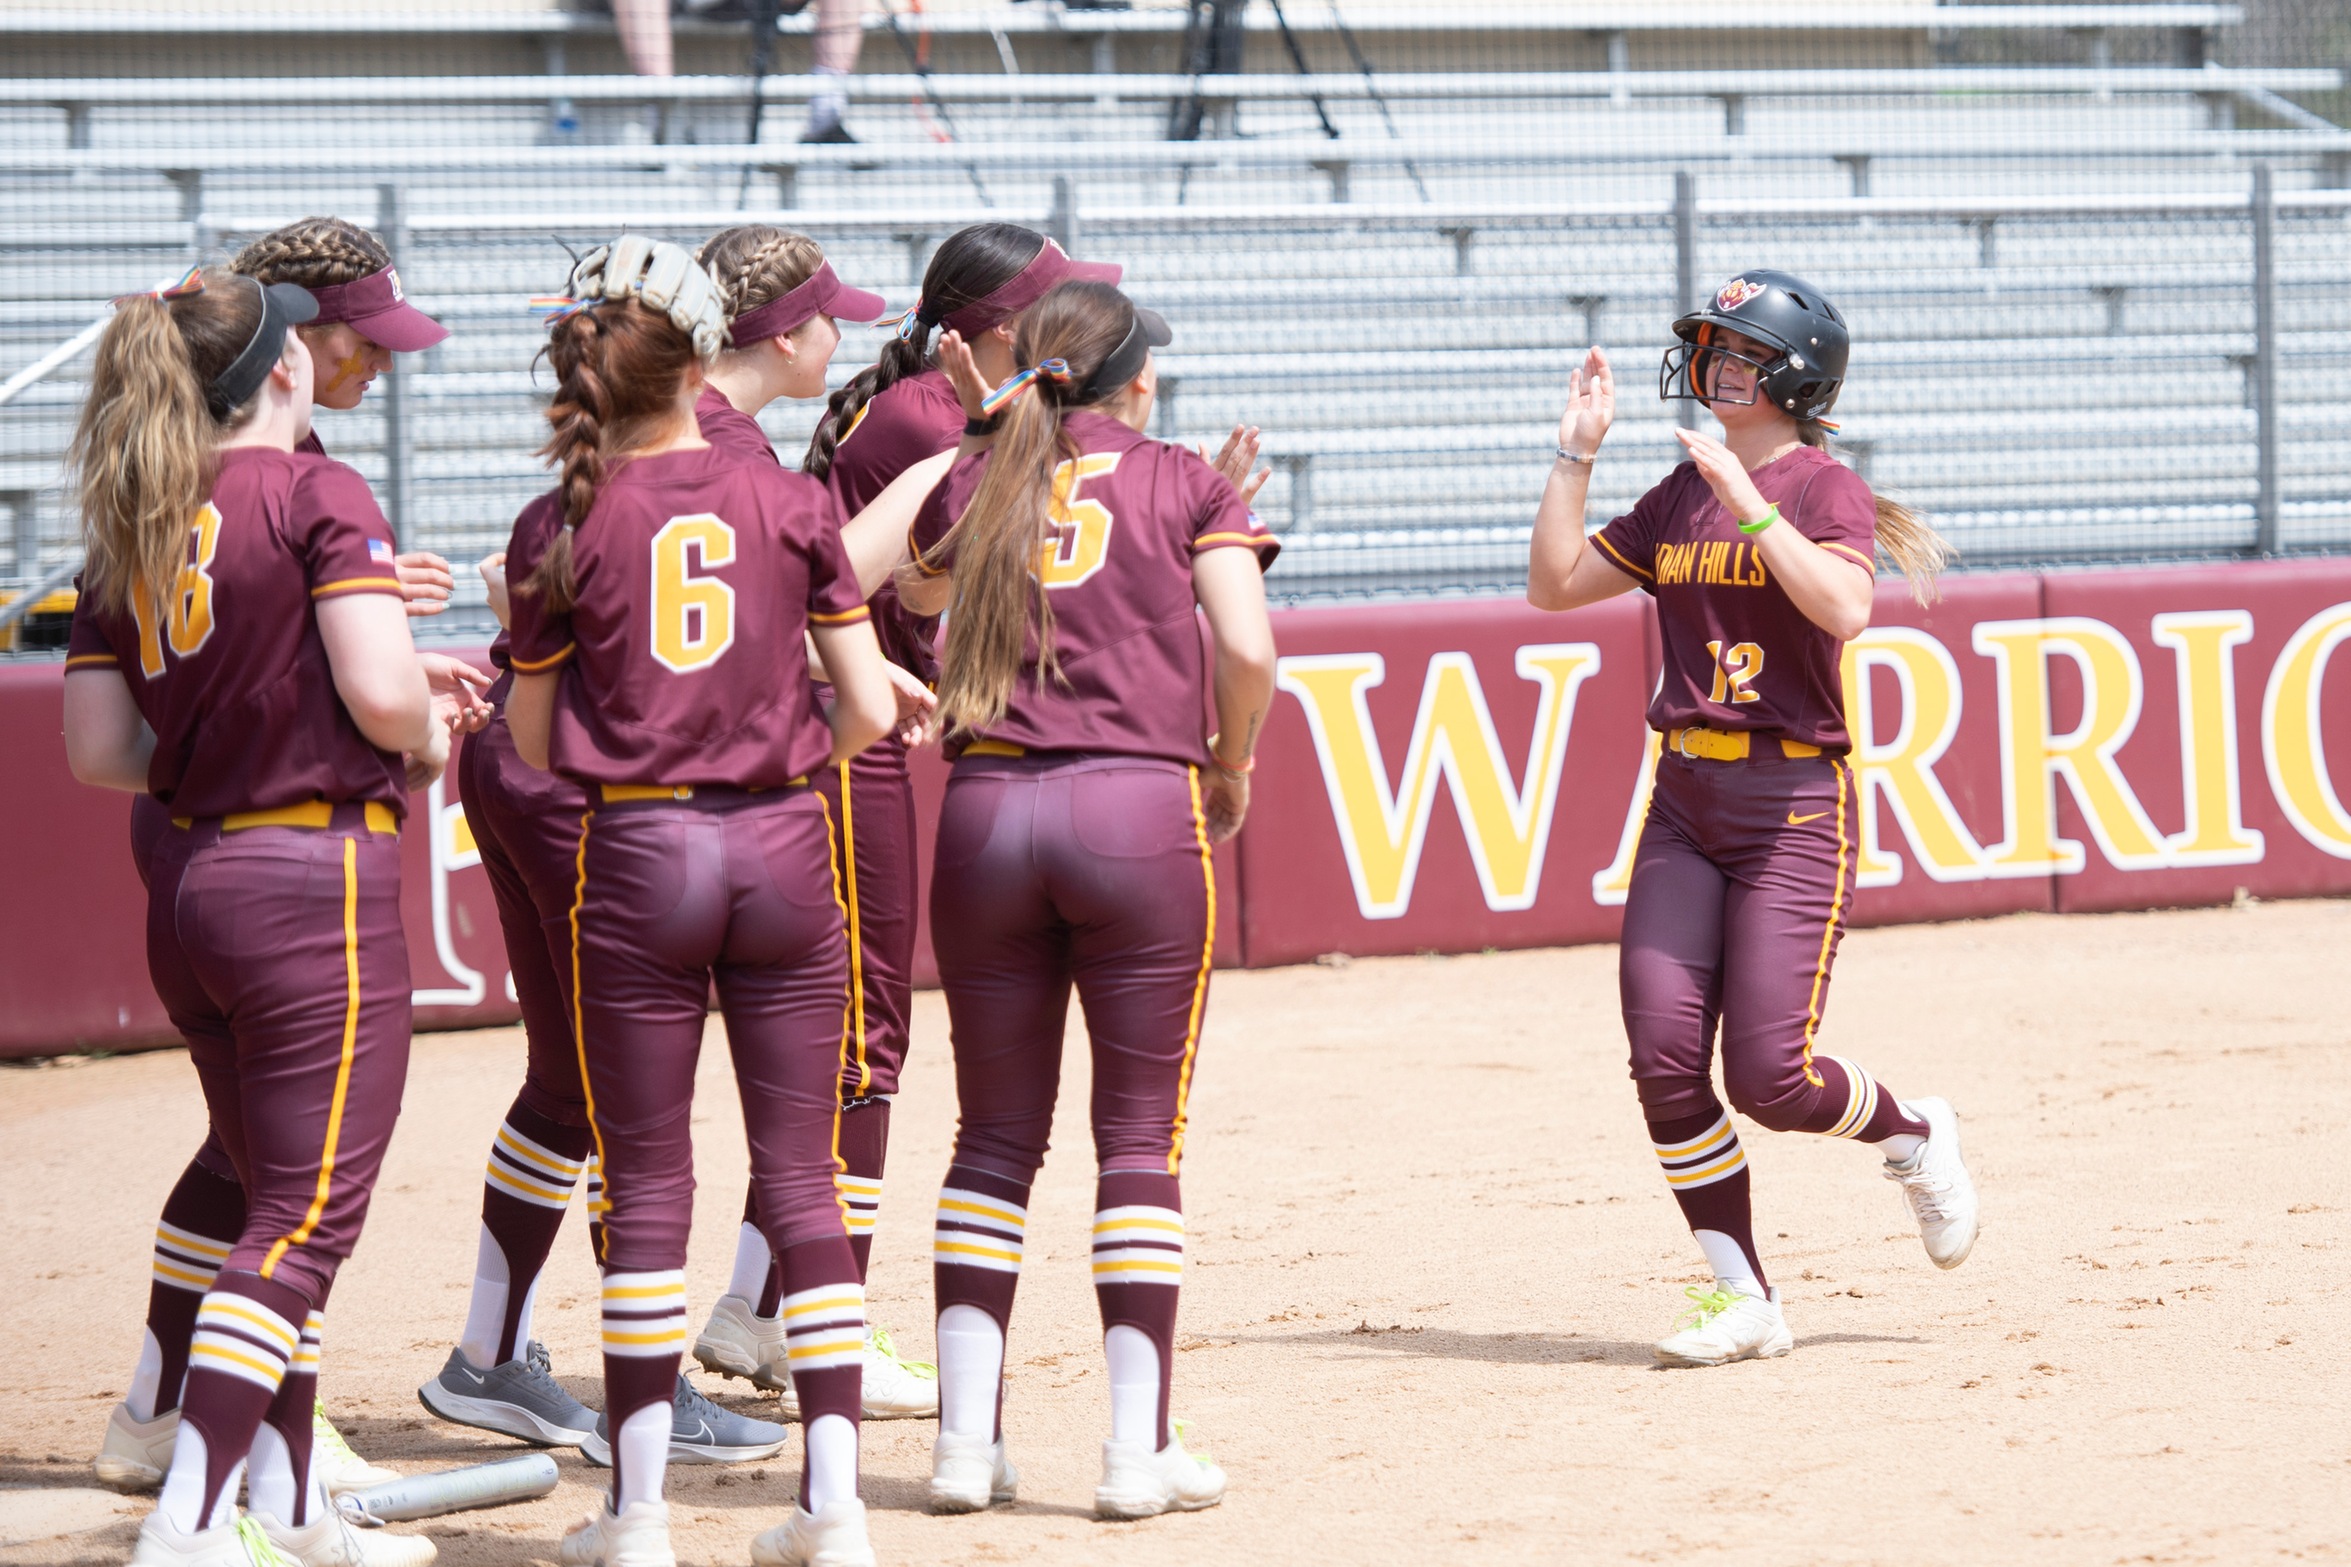 IHCC SWEEPS SOUTHEASTERN, MOVE CLOSER TO HISTORY